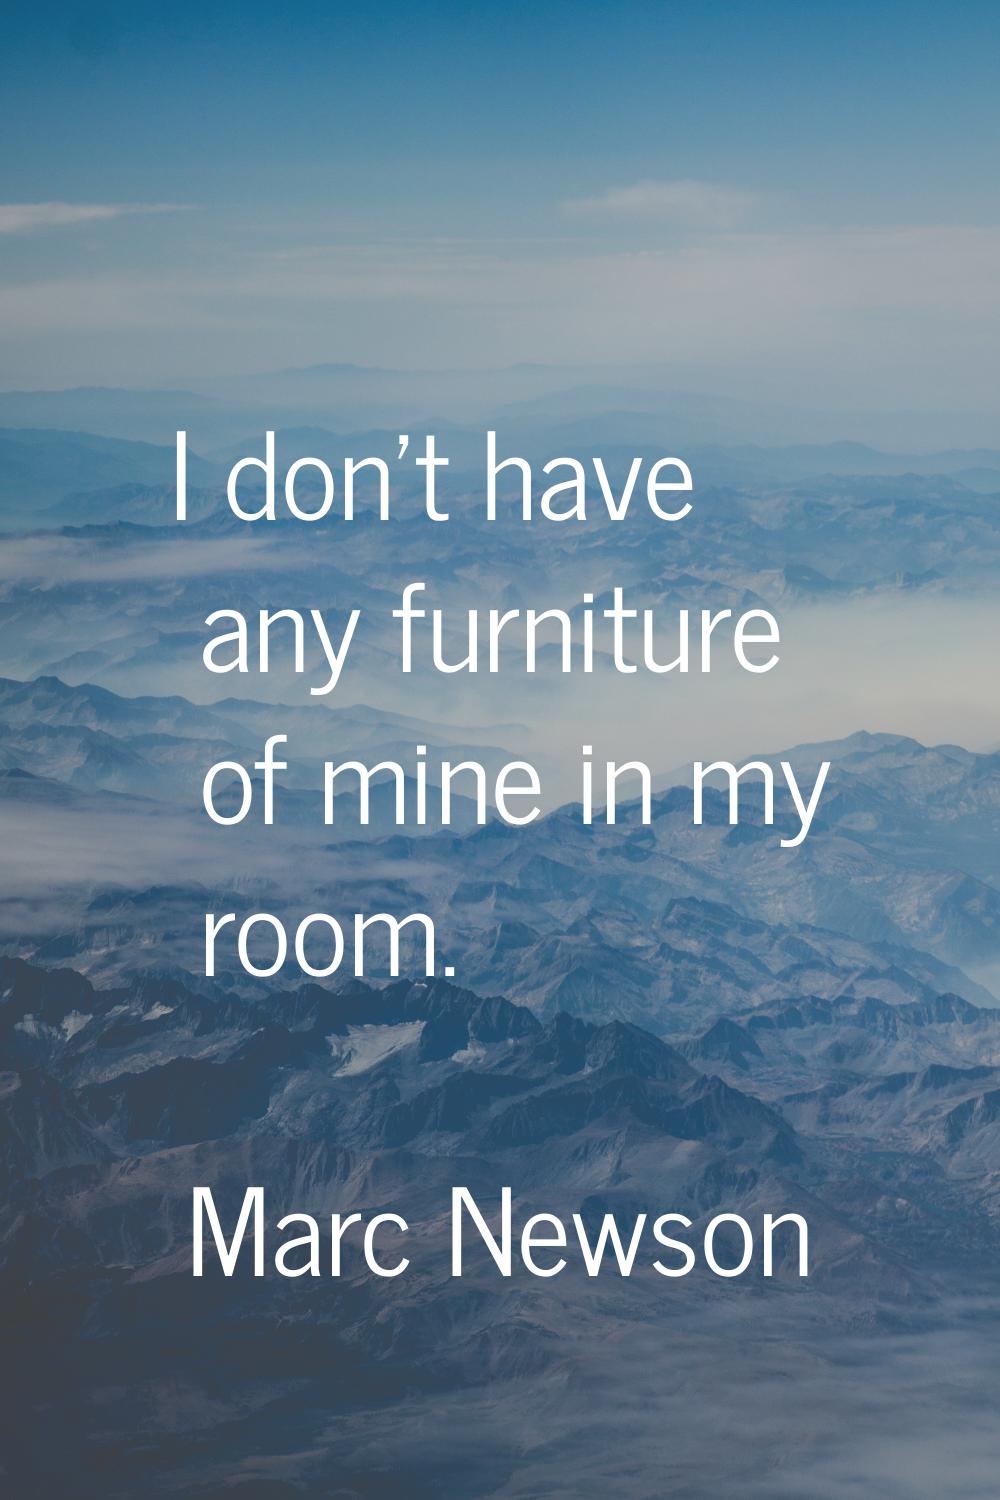 I don't have any furniture of mine in my room.